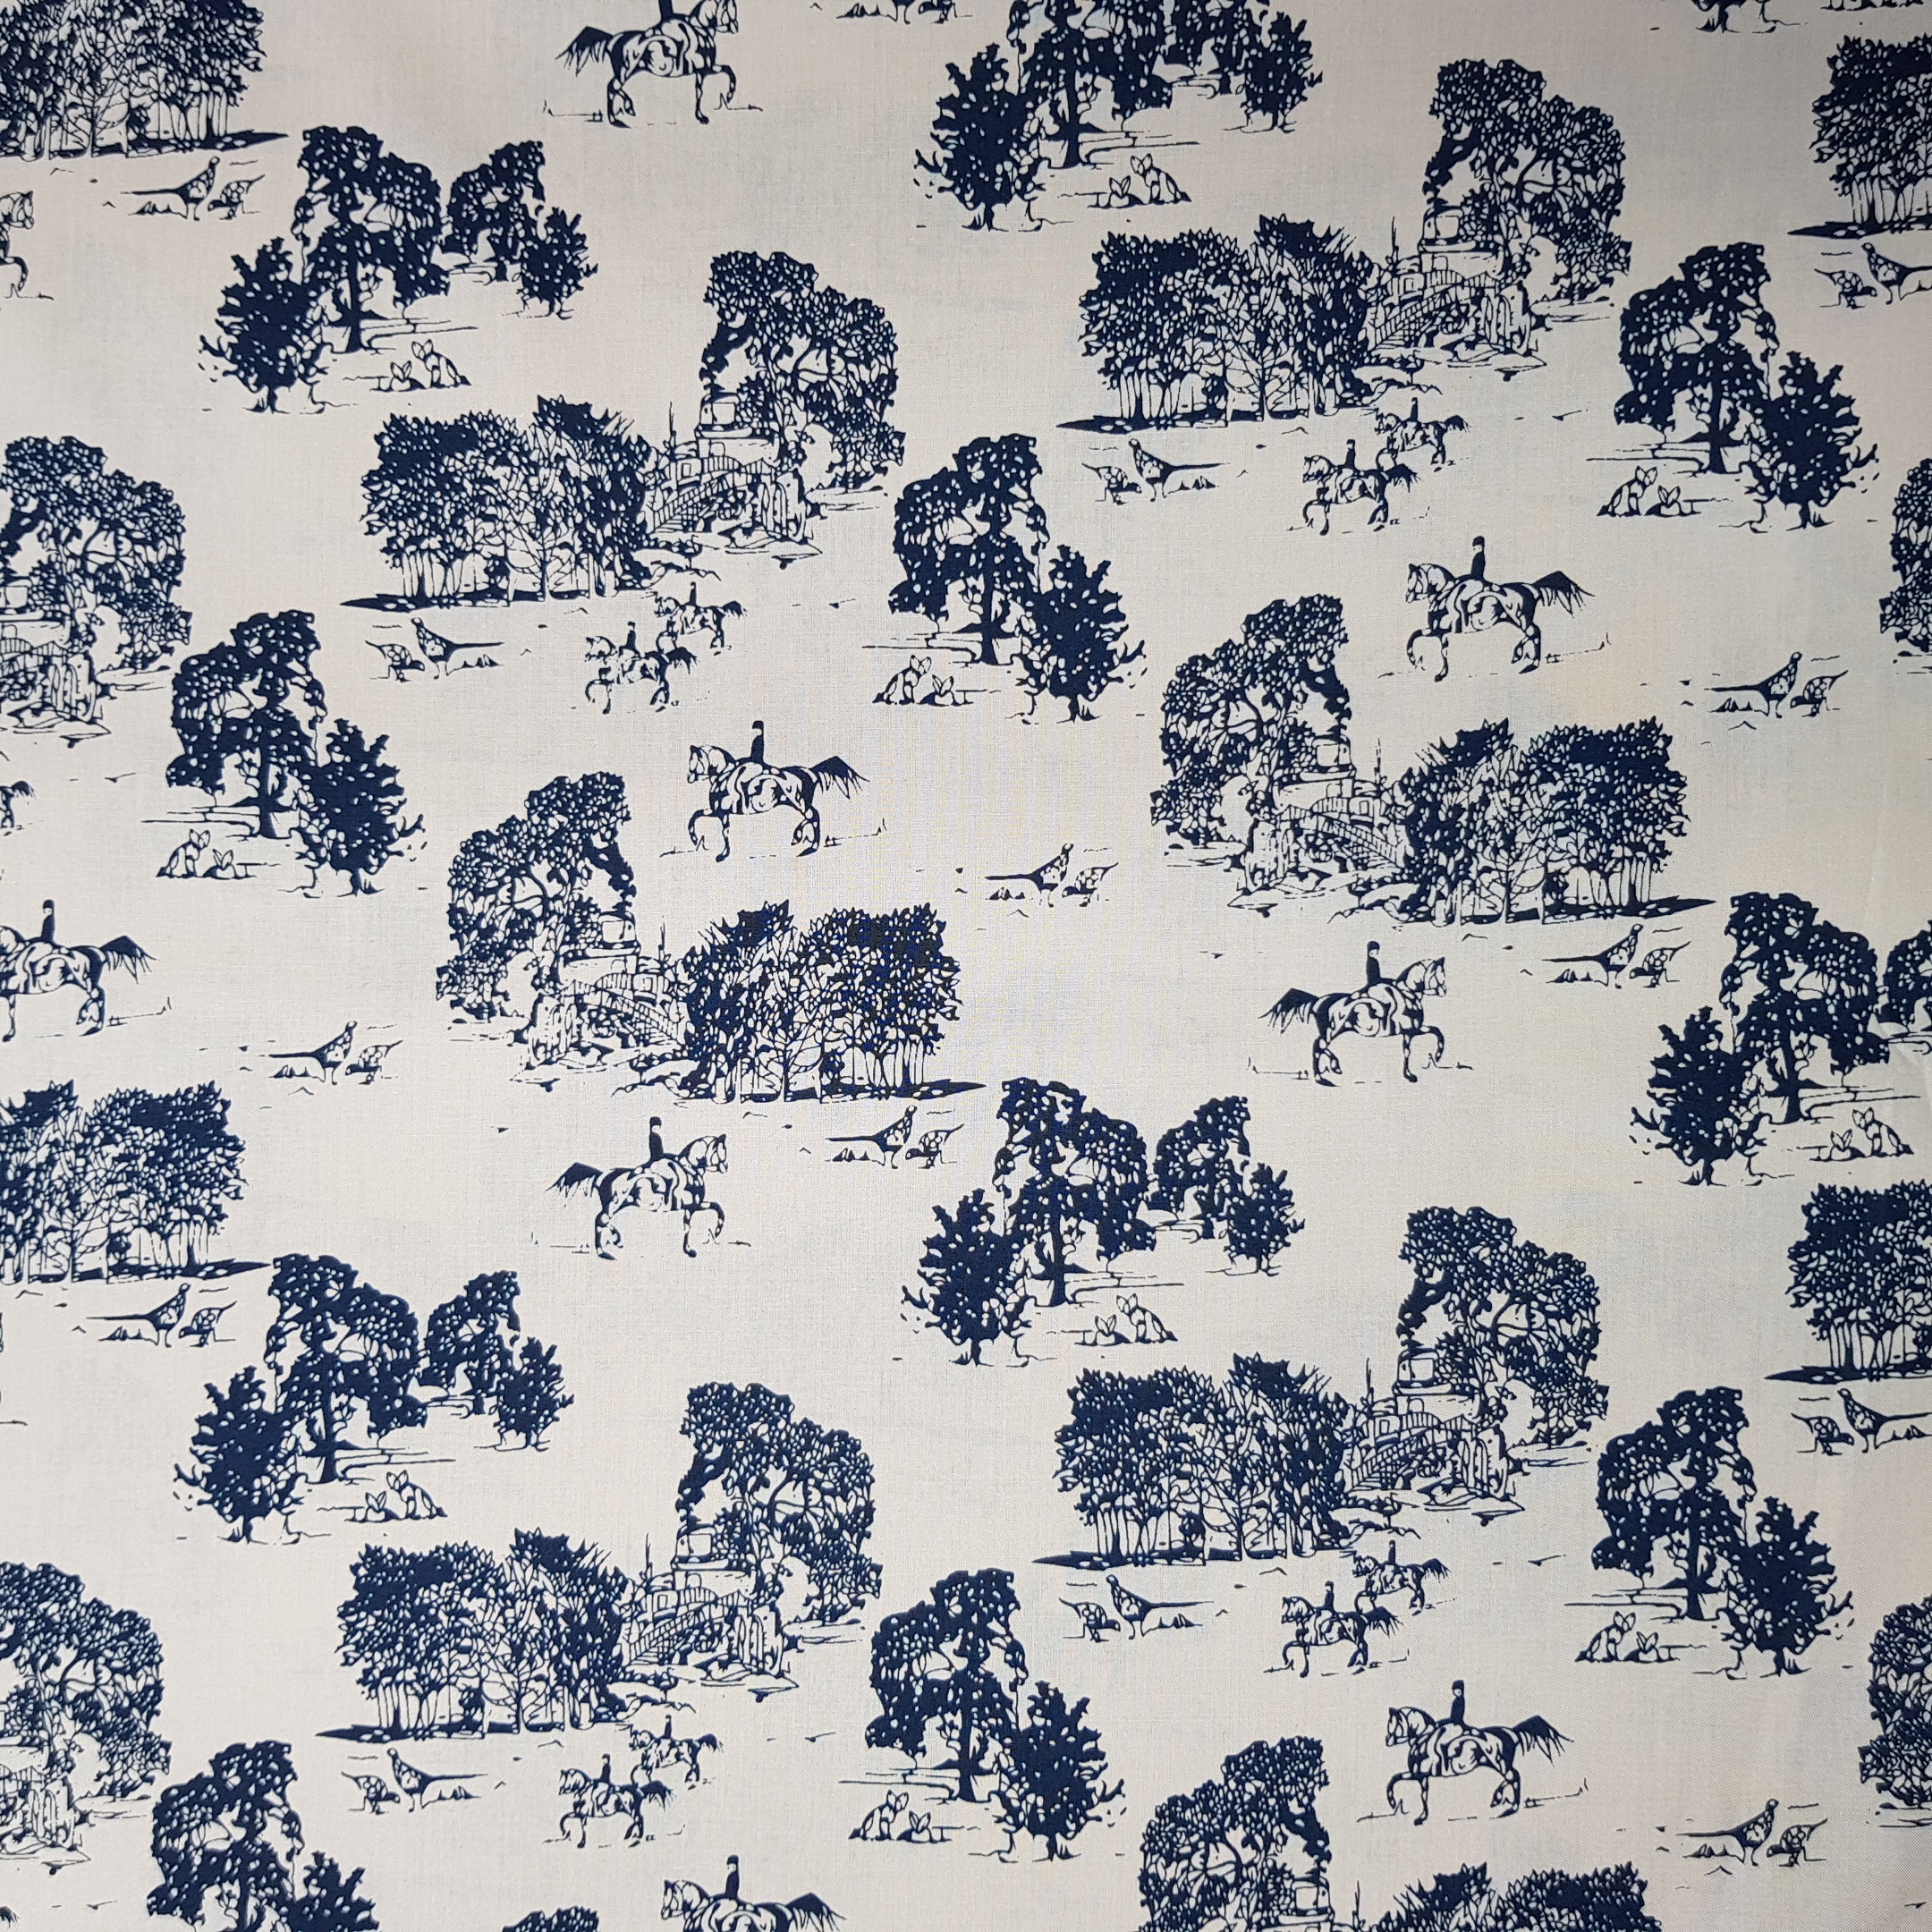 Horse Trotting - Printed Cotton